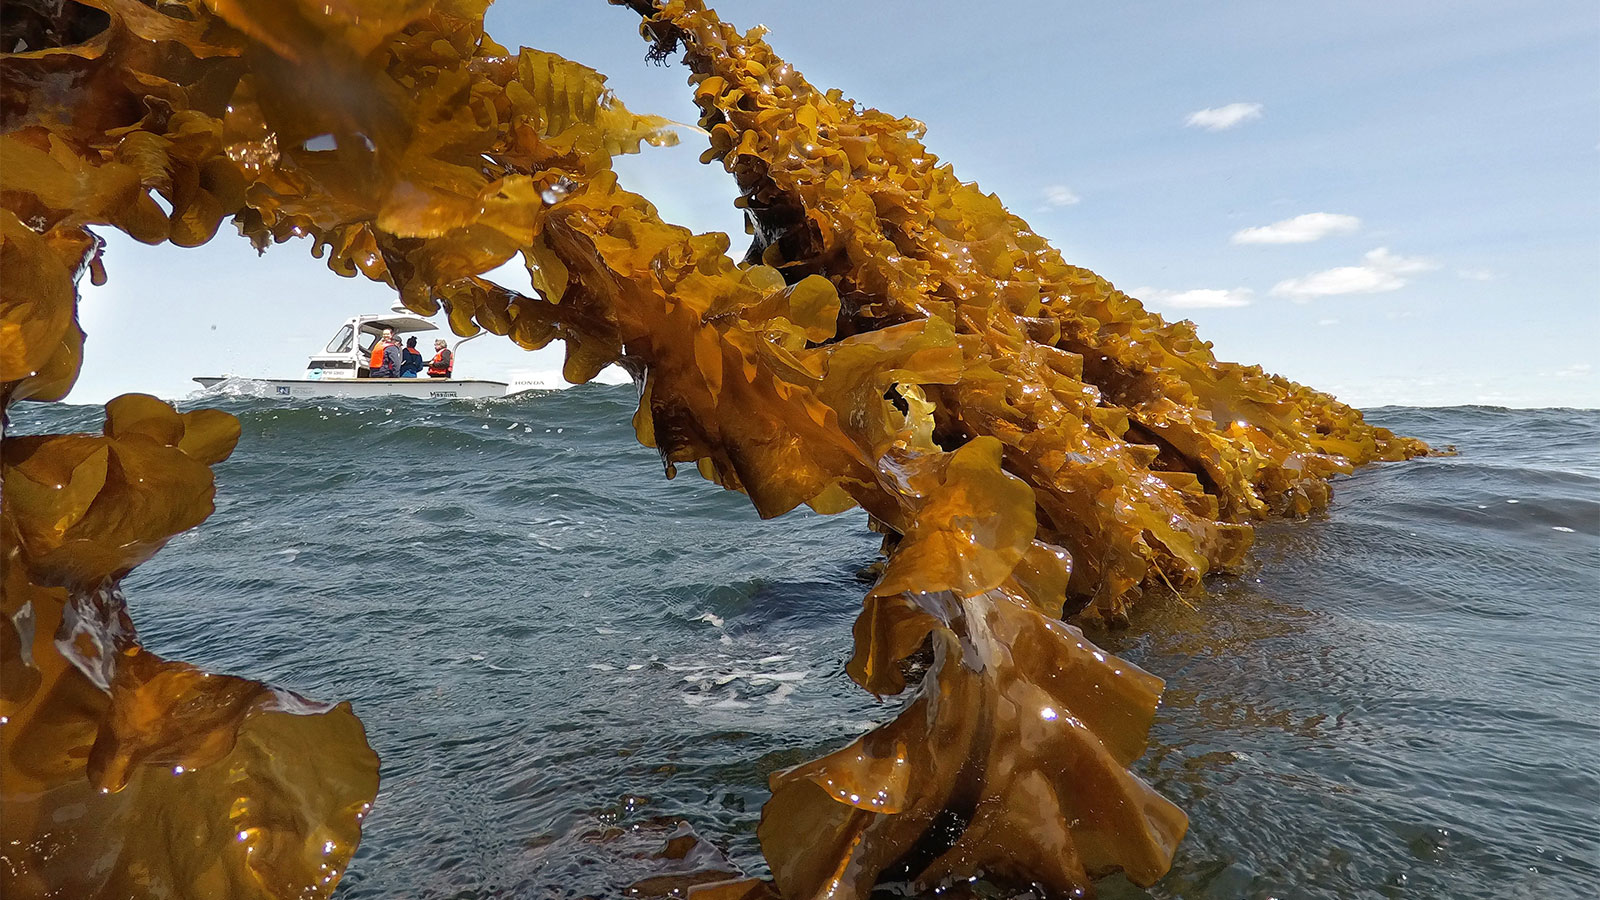 Kelp clinging to a rope connected to a boat